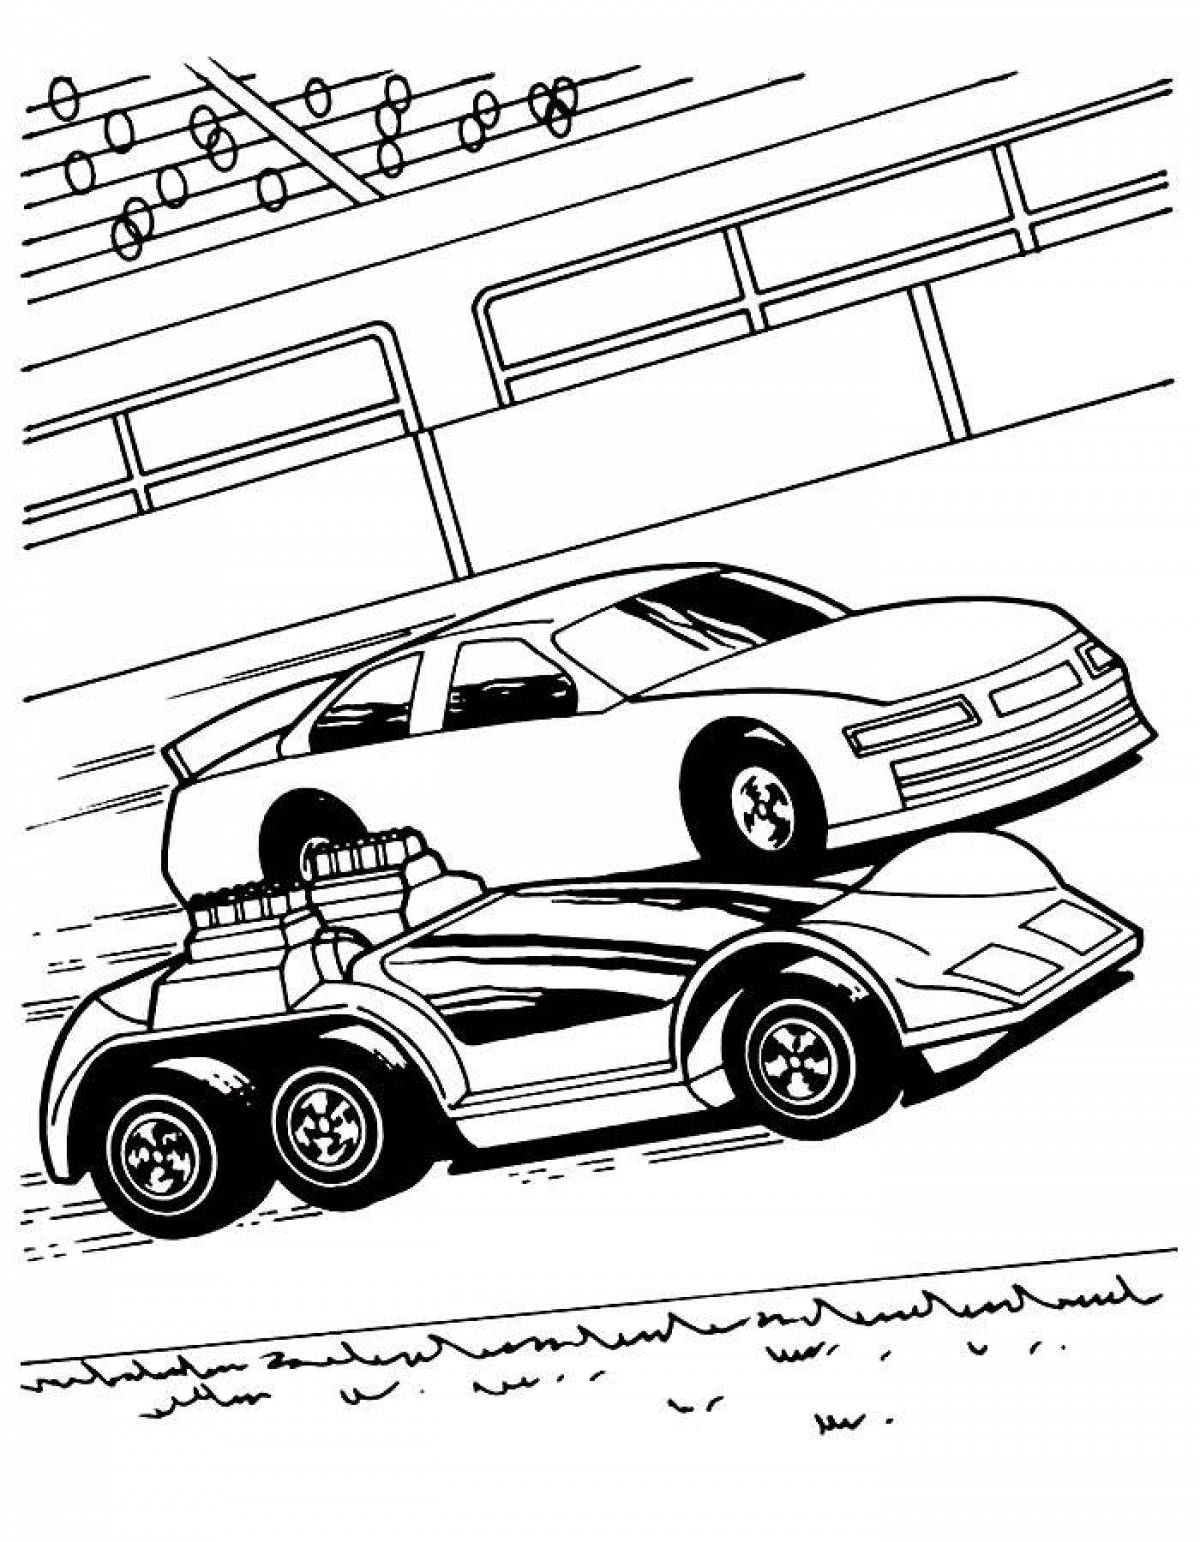 Exciting hot wheels coloring book for kids